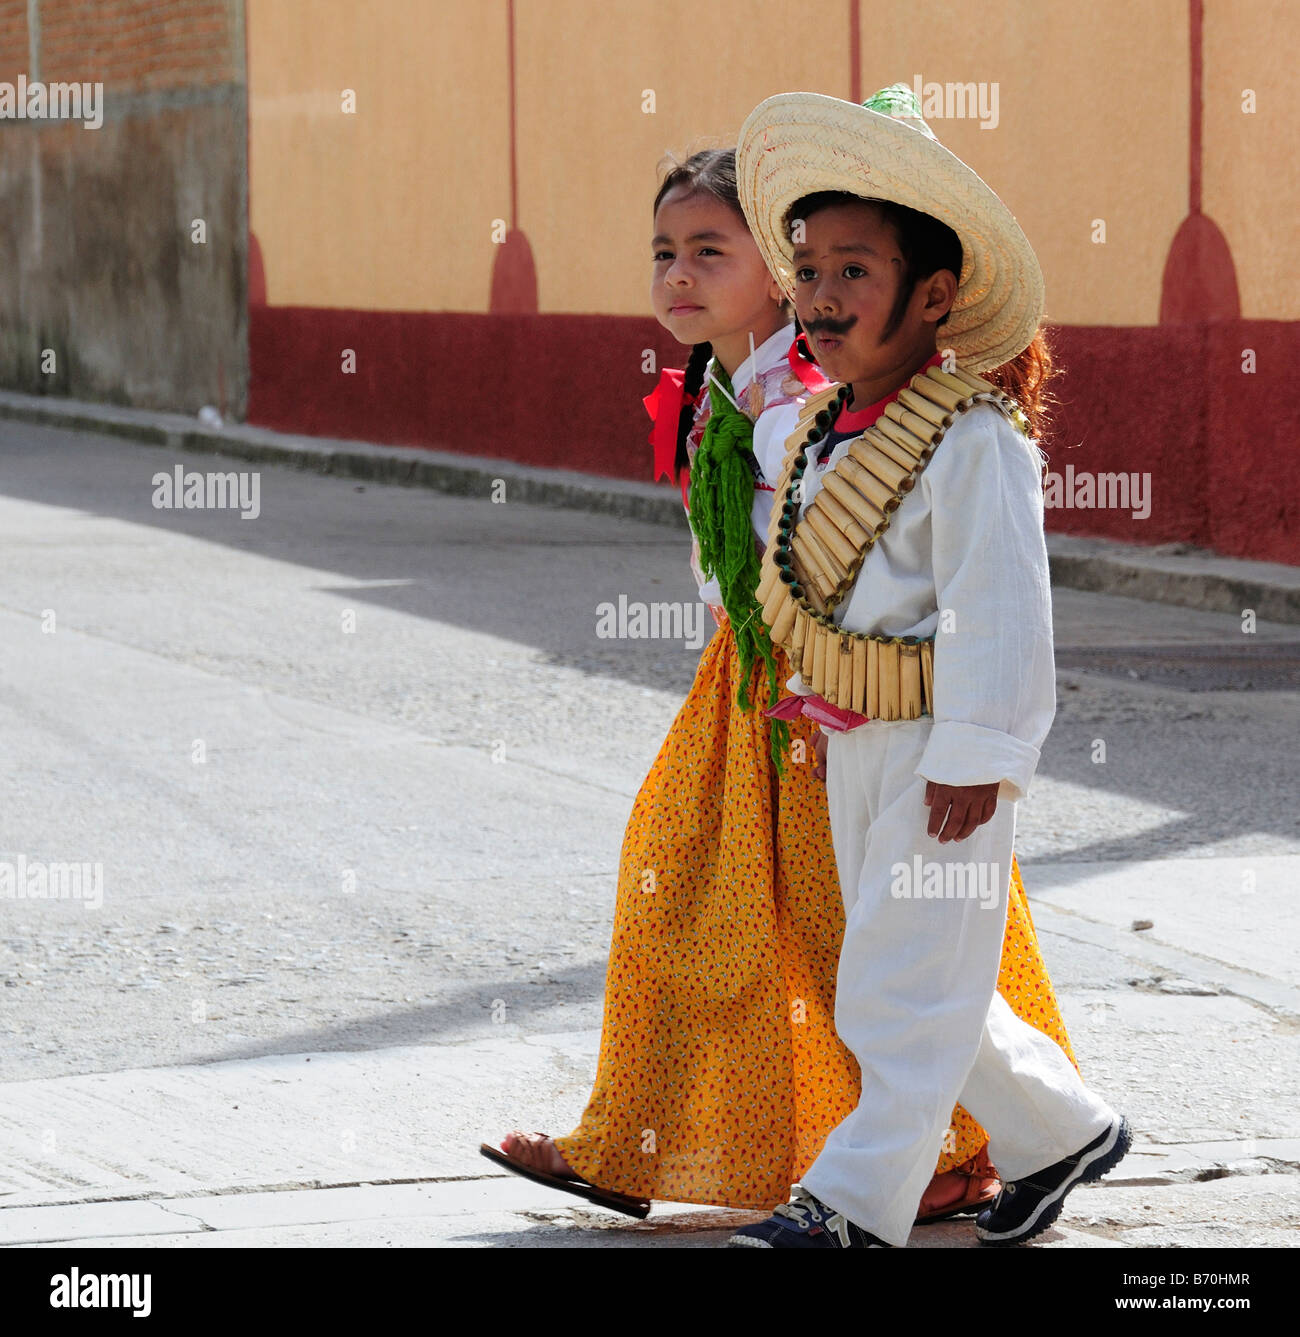 Mexican children in national costume parading on Anniversary of the  Revolution Stock Photo - Alamy